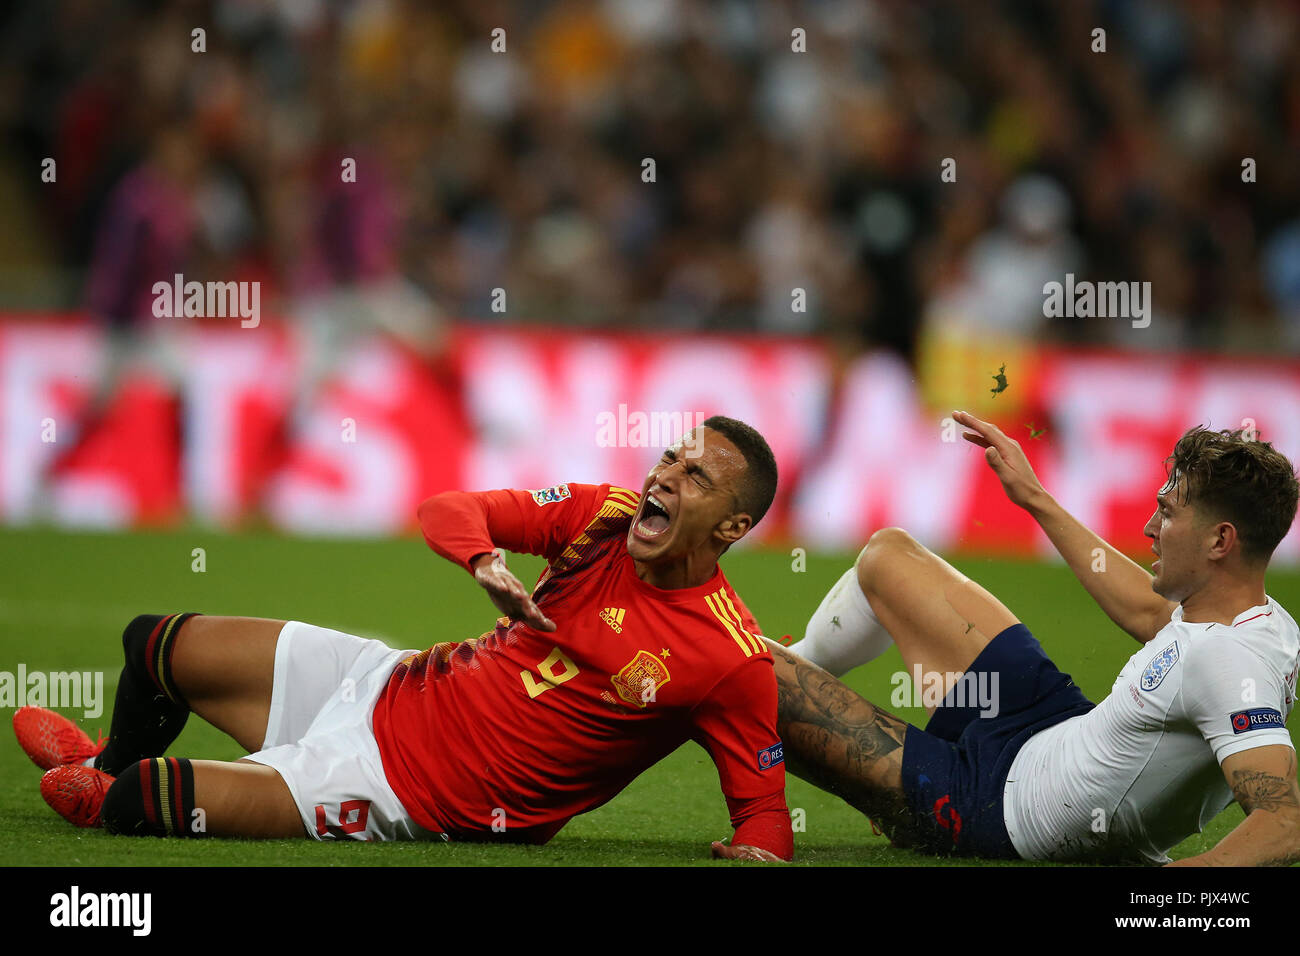 London, UK. 08th Sep, 2018. John Stones of England fouls Rodrigo of Spain. UEFA Nations league A, group 4 match, England v Spain at Wembley Stadium in London on Saturday 8th September 2018.  Please note images are for Editorial Use Only. pic by Andrew Orchard/Alamy Live news Credit: Andrew Orchard sports photography/Alamy Live News Stock Photo